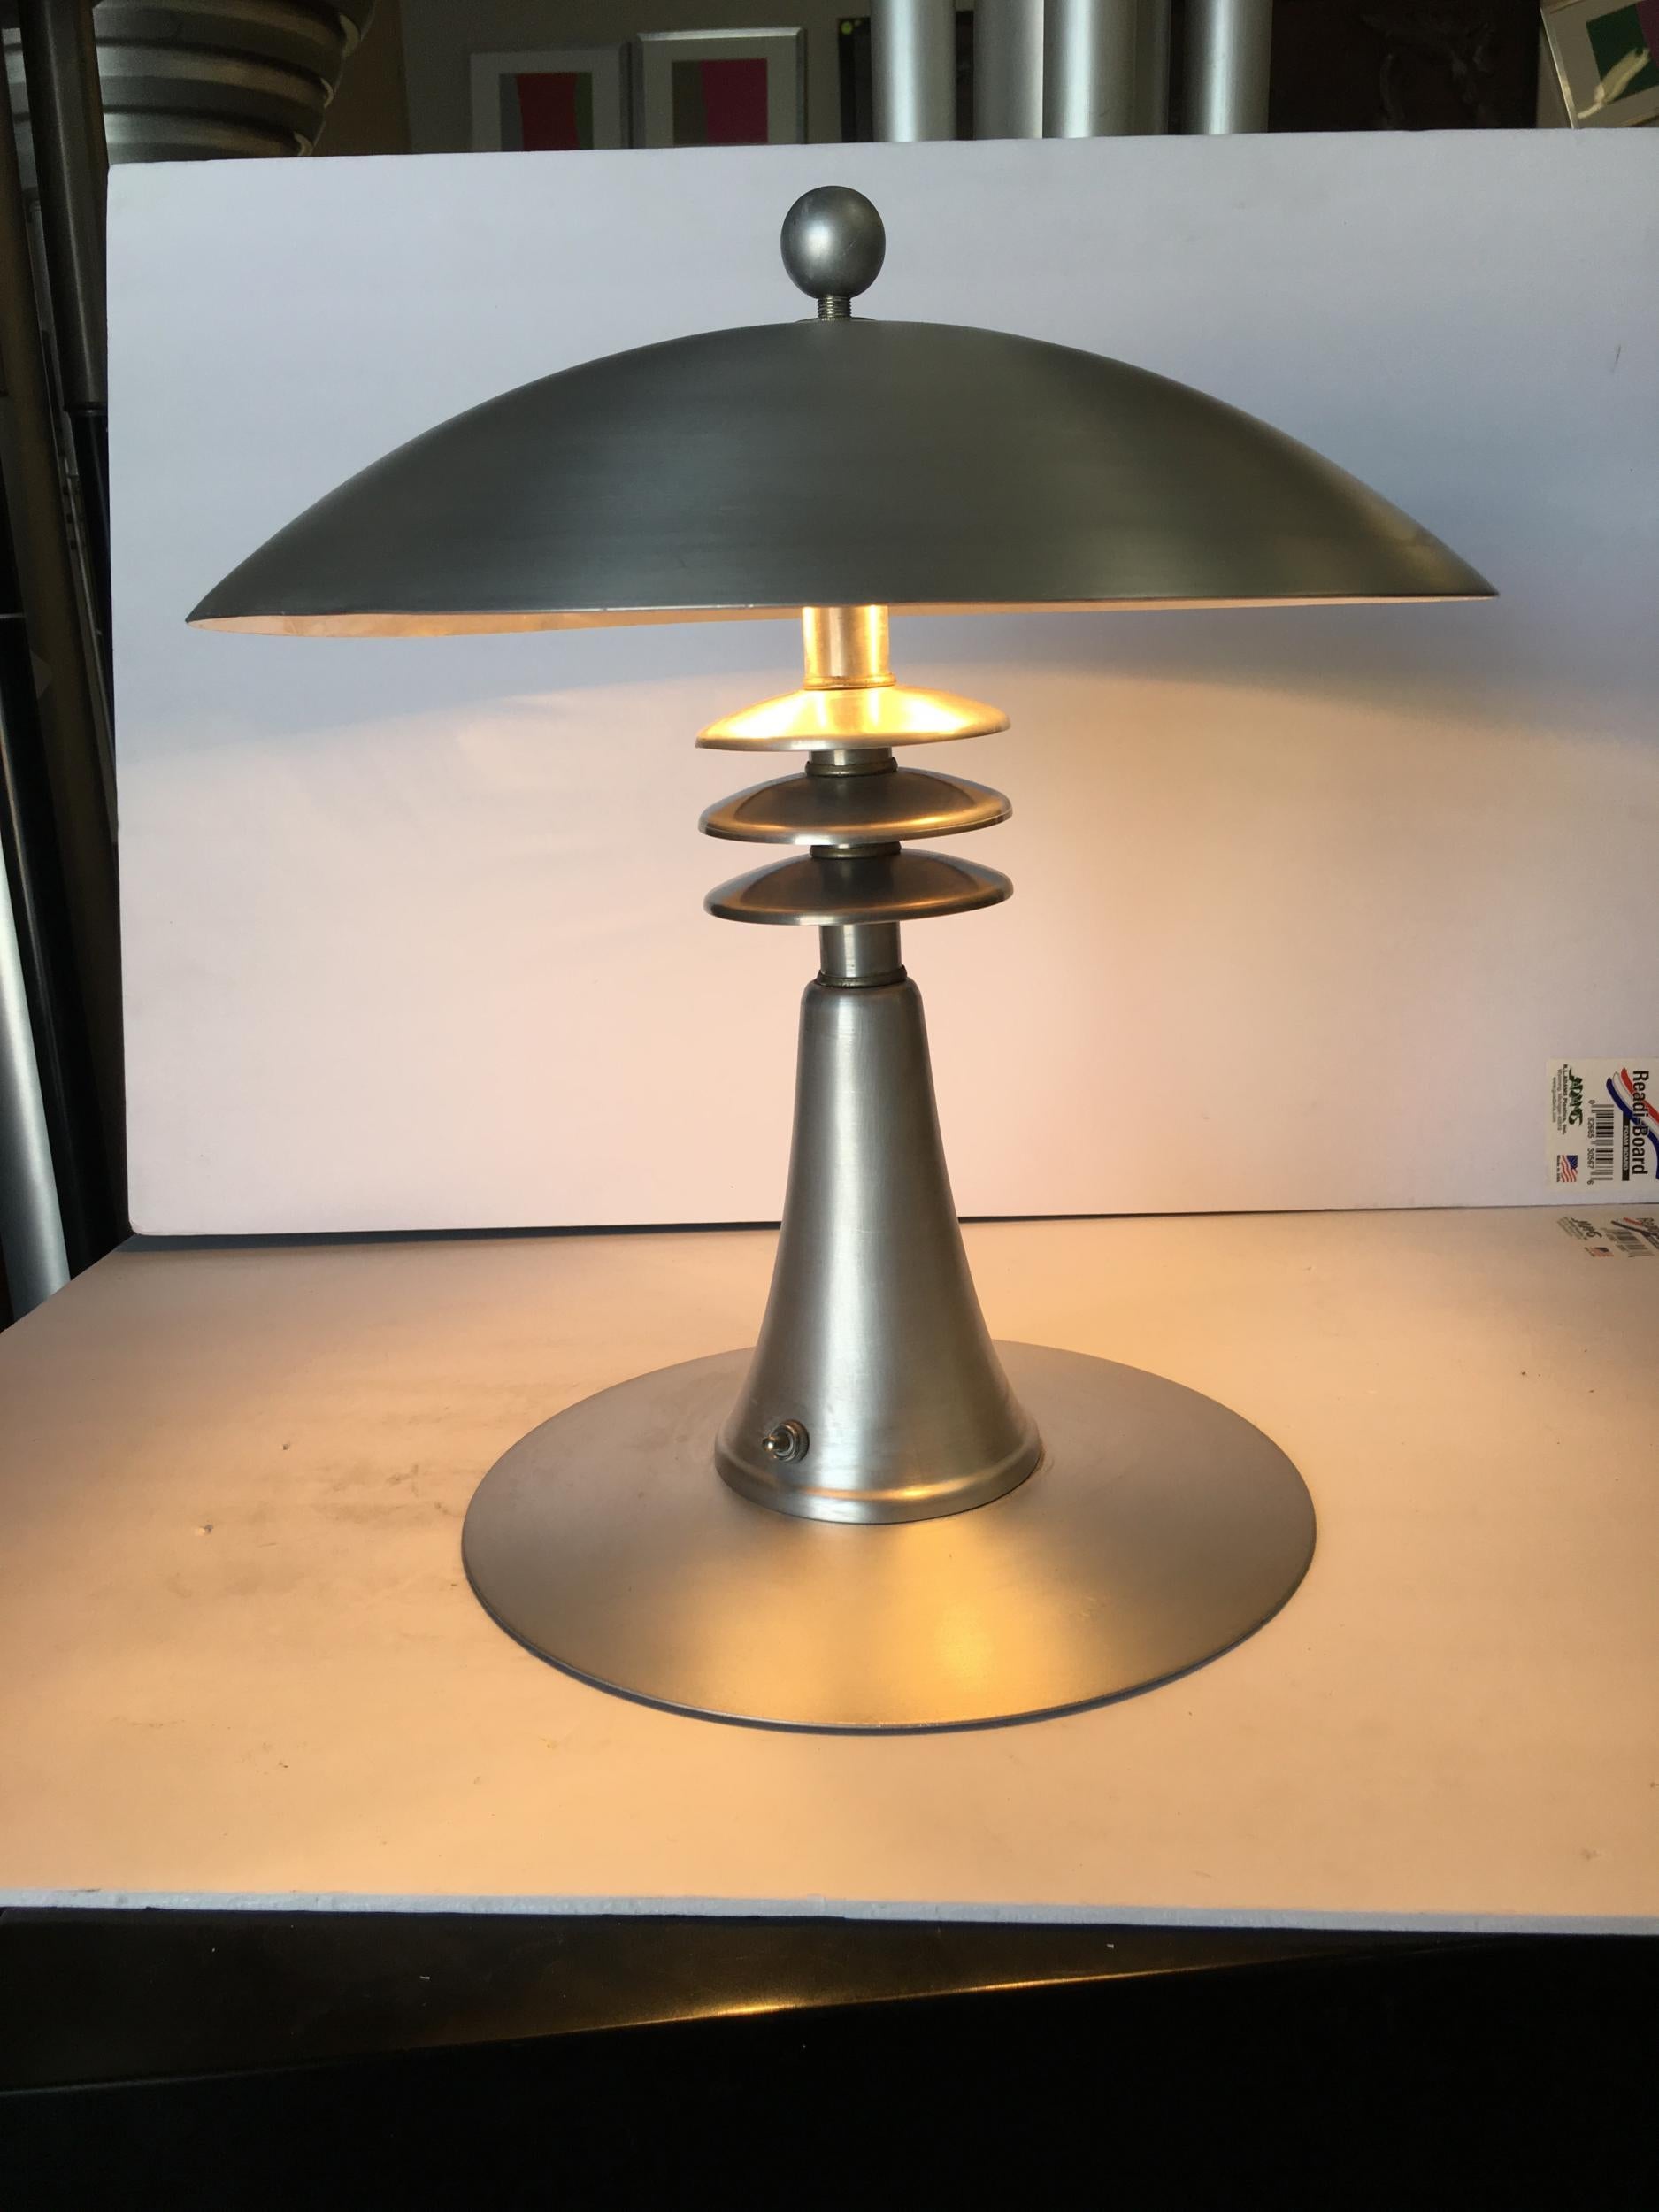 This stunning aluminum Art Deco style table lamp features a 14